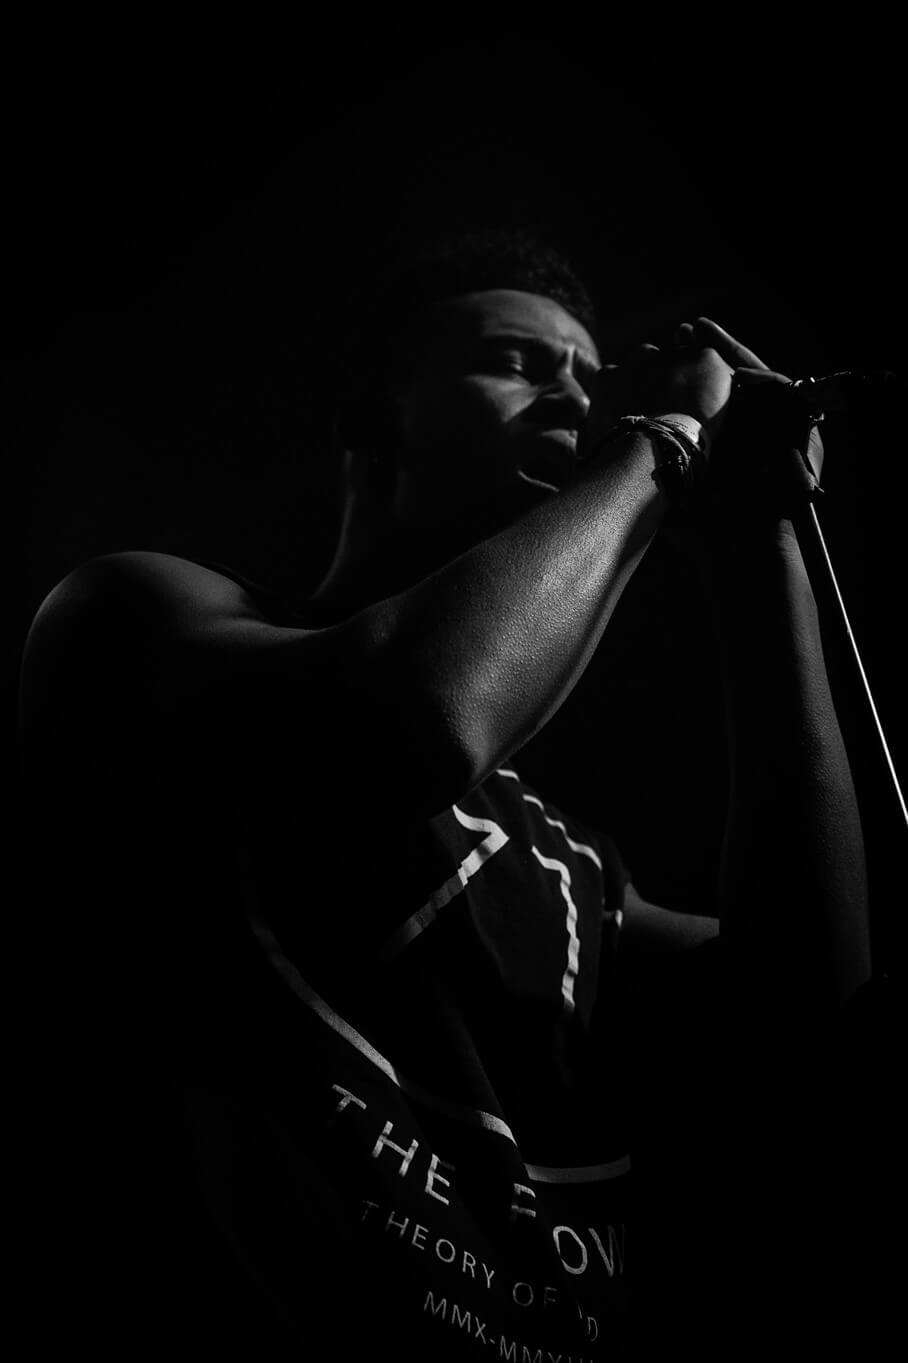 Event photography - Jordan Lewin of MDNGHT at Gorilla, Manchester black & white